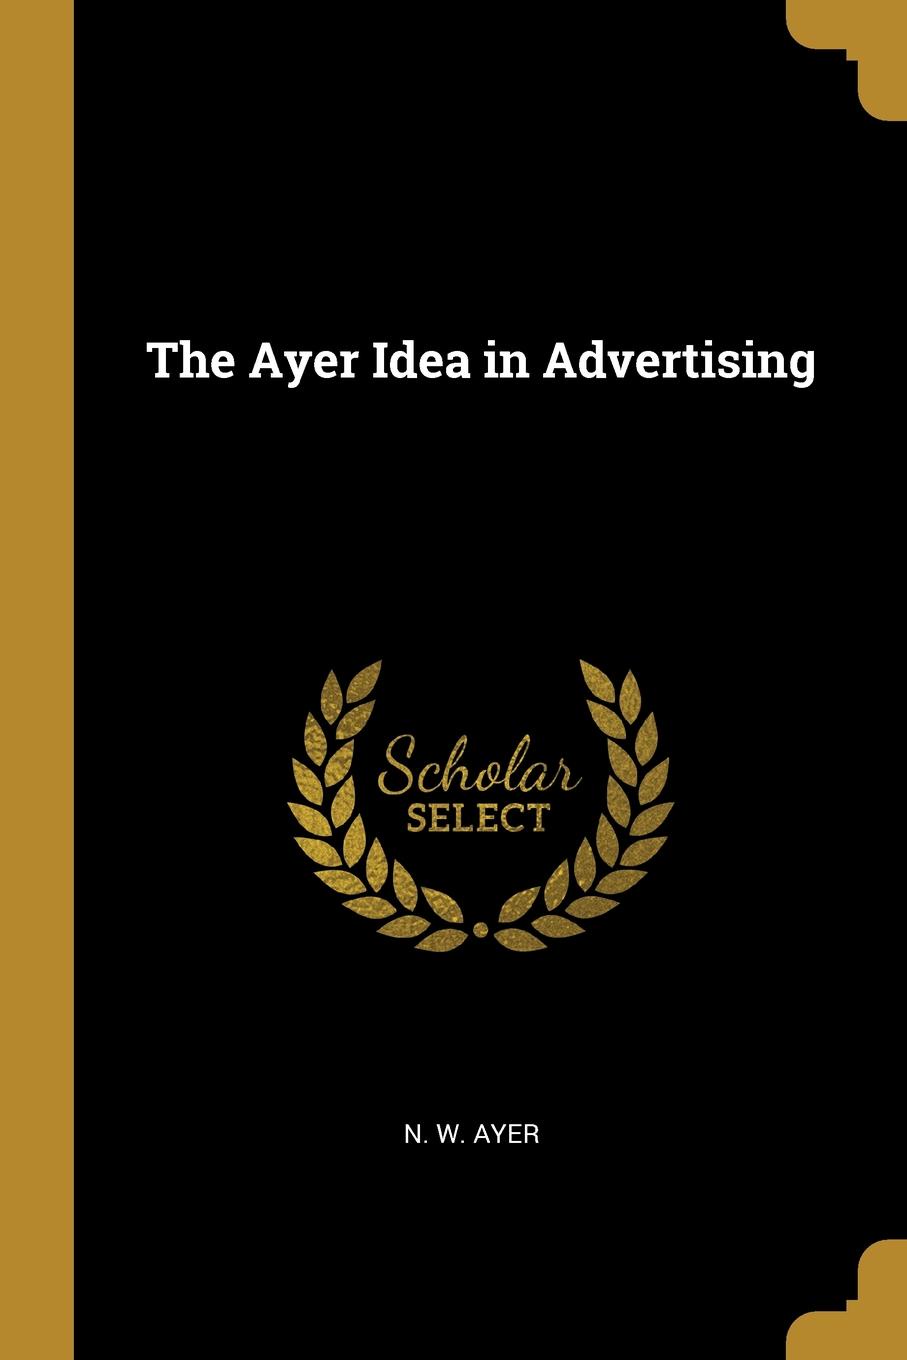 The Ayer Idea in Advertising